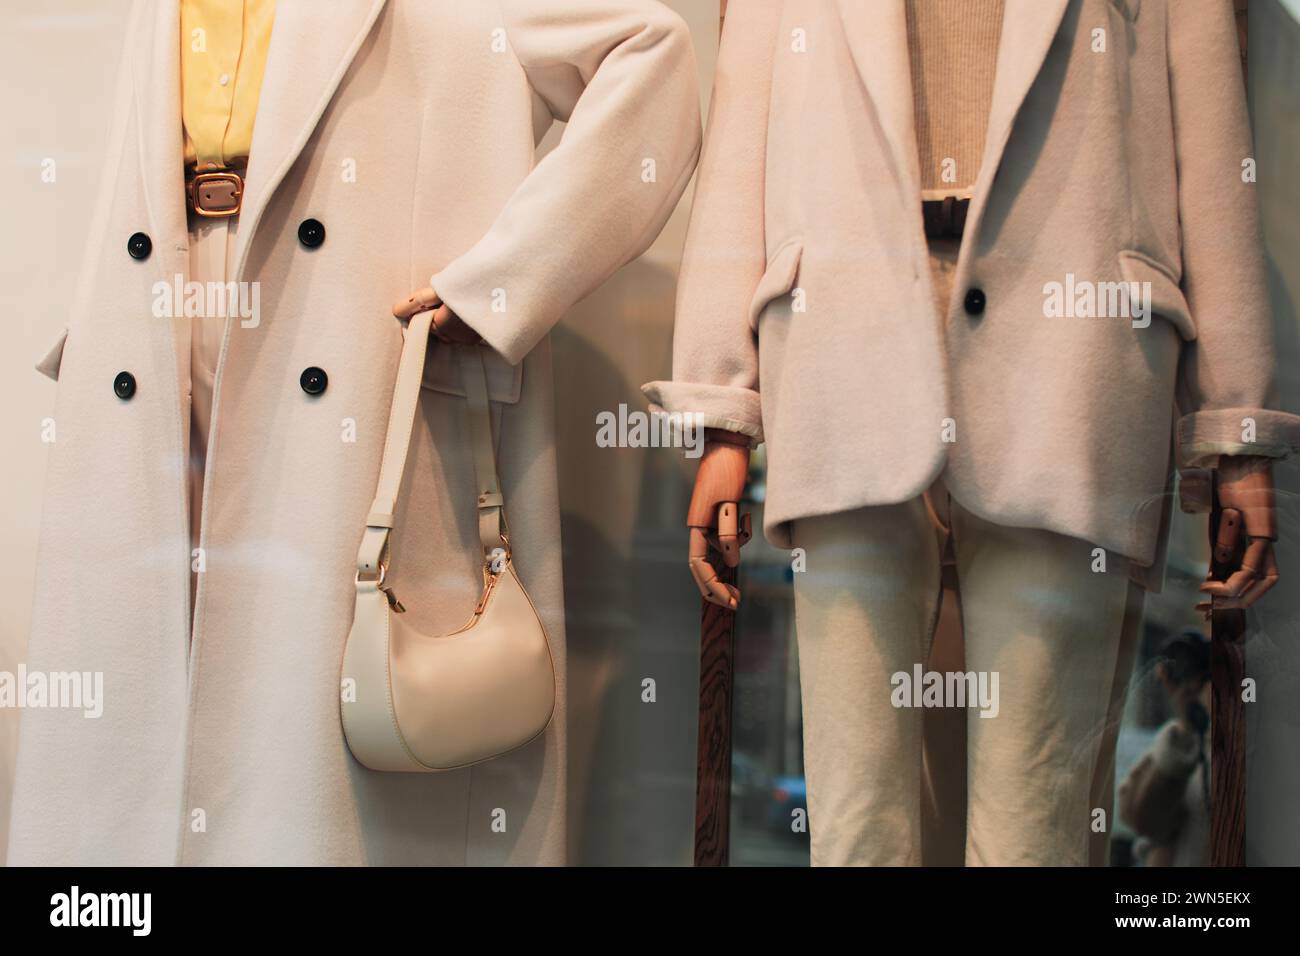 Fancy mannequins in a store window dressed in seasonal fashion cloth. White coat, jacket and handbag Stock Photo